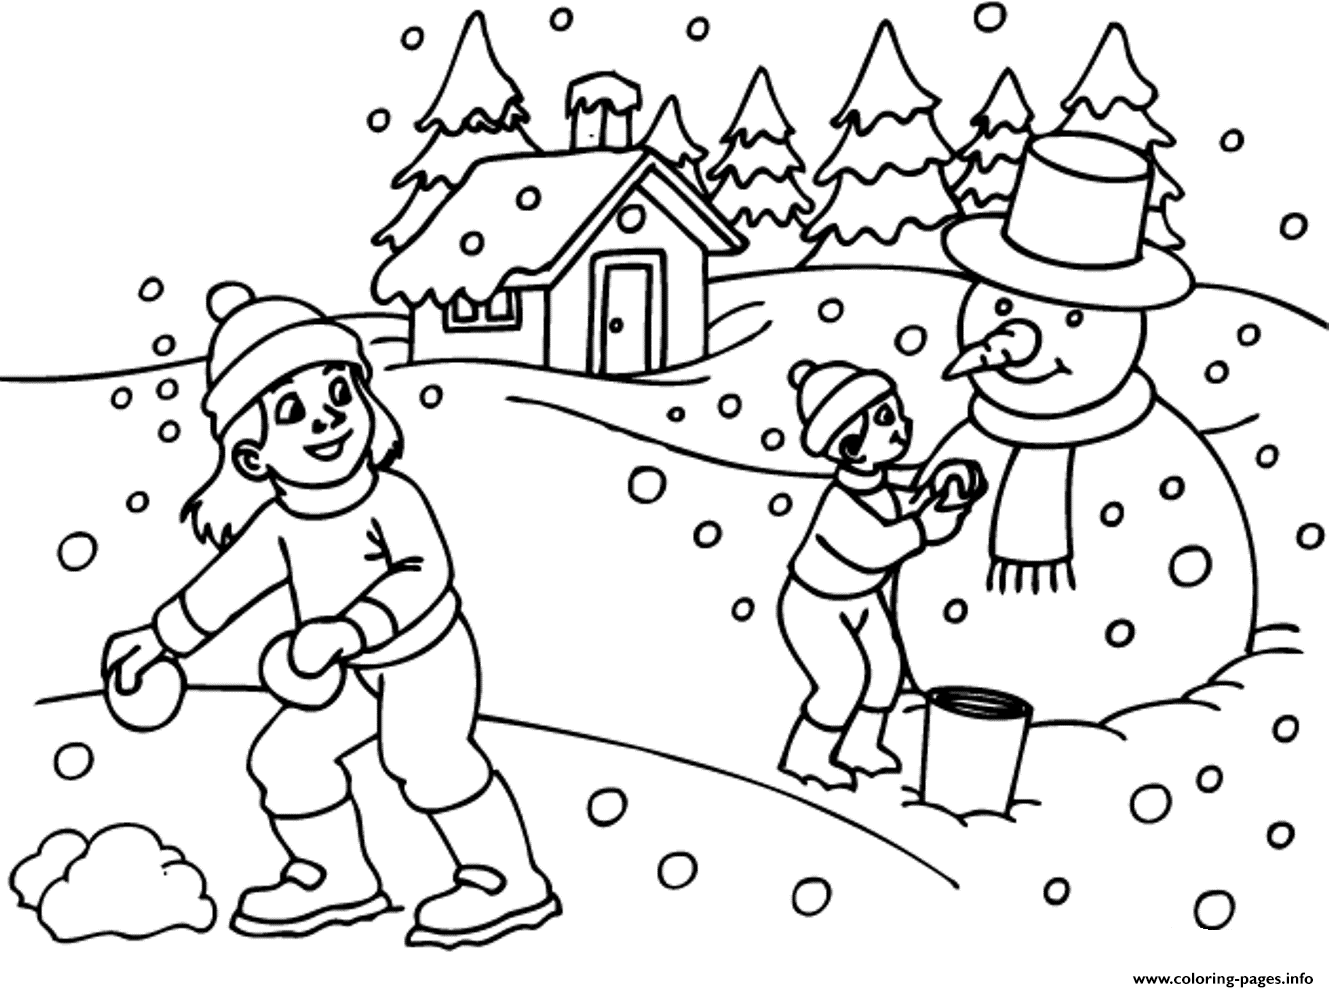 Playing Snow In The Winter S Printable8b0f coloring